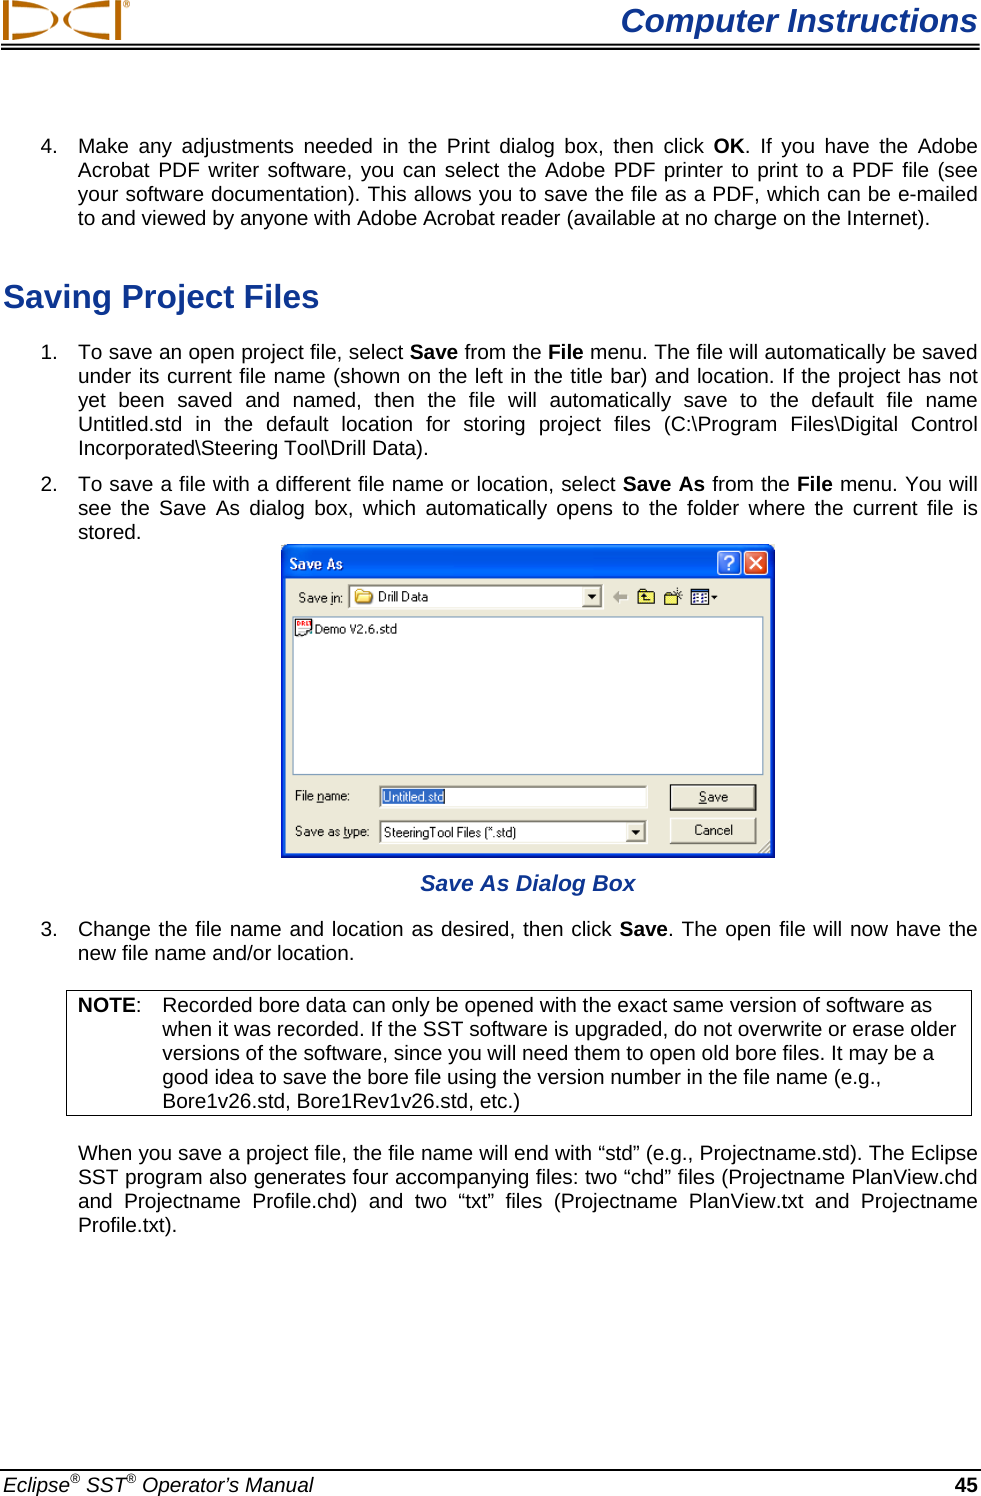  Computer Instructions 4.  Make any adjustments needed in the Print dialog box, then click OK. If you have the Adobe Acrobat PDF writer software, you can select the Adobe PDF printer to print to a PDF file (see your software documentation). This allows you to save the file as a PDF, which can be e-mailed to and viewed by anyone with Adobe Acrobat reader (available at no charge on the Internet).   Saving Project Files 1.  To save an open project file, select Save from the File menu. The file will automatically be saved under its current file name (shown on the left in the title bar) and location. If the project has not yet been saved and named, then the file will automatically save to the default file name Untitled.std in the default location for storing project files (C:\Program Files\Digital Control Incorporated\Steering Tool\Drill Data). 2.  To save a file with a different file name or location, select Save As from the File menu. You will see the Save As dialog box, which automatically opens to the folder where the current file is stored.   Save As Dialog Box 3.  Change the file name and location as desired, then click Save. The open file will now have the new file name and/or location. NOTE:  Recorded bore data can only be opened with the exact same version of software as when it was recorded. If the SST software is upgraded, do not overwrite or erase older versions of the software, since you will need them to open old bore files. It may be a good idea to save the bore file using the version number in the file name (e.g., Bore1v26.std, Bore1Rev1v26.std, etc.) When you save a project file, the file name will end with “std” (e.g., Projectname.std). The Eclipse SST program also generates four accompanying files: two “chd” files (Projectname PlanView.chd and Projectname Profile.chd) and two “txt” files (Projectname PlanView.txt and Projectname Profile.txt).  Eclipse® SST® Operator’s Manual  45 